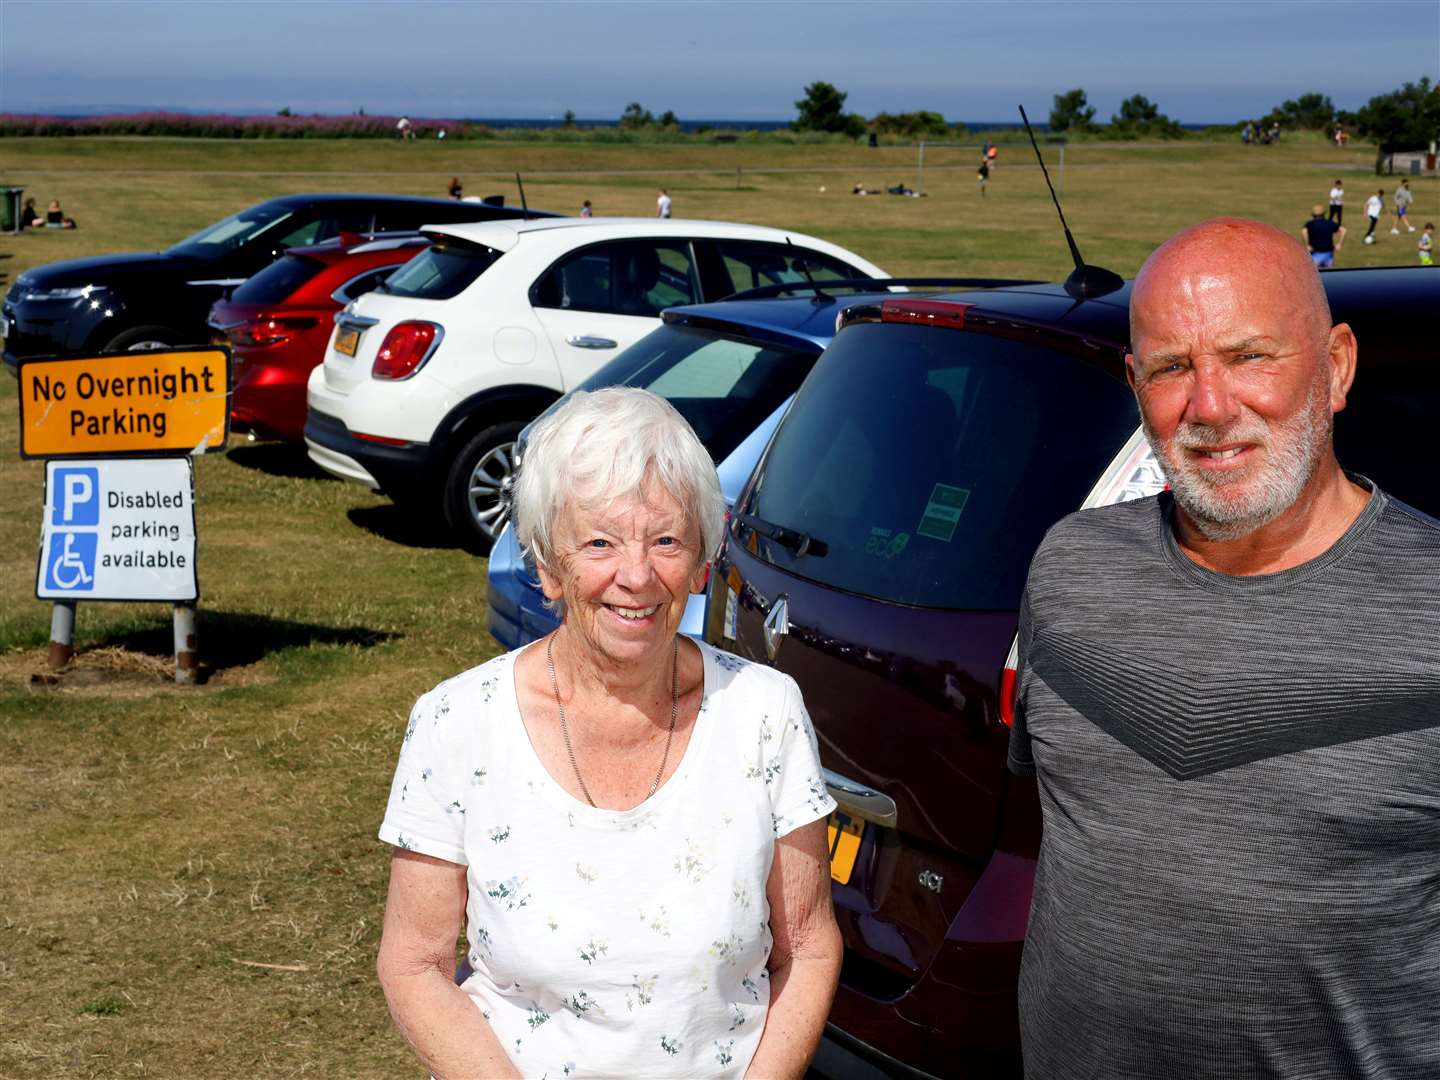 Local residents Evelyn Main and James Walker among those concerned about encroaching car.